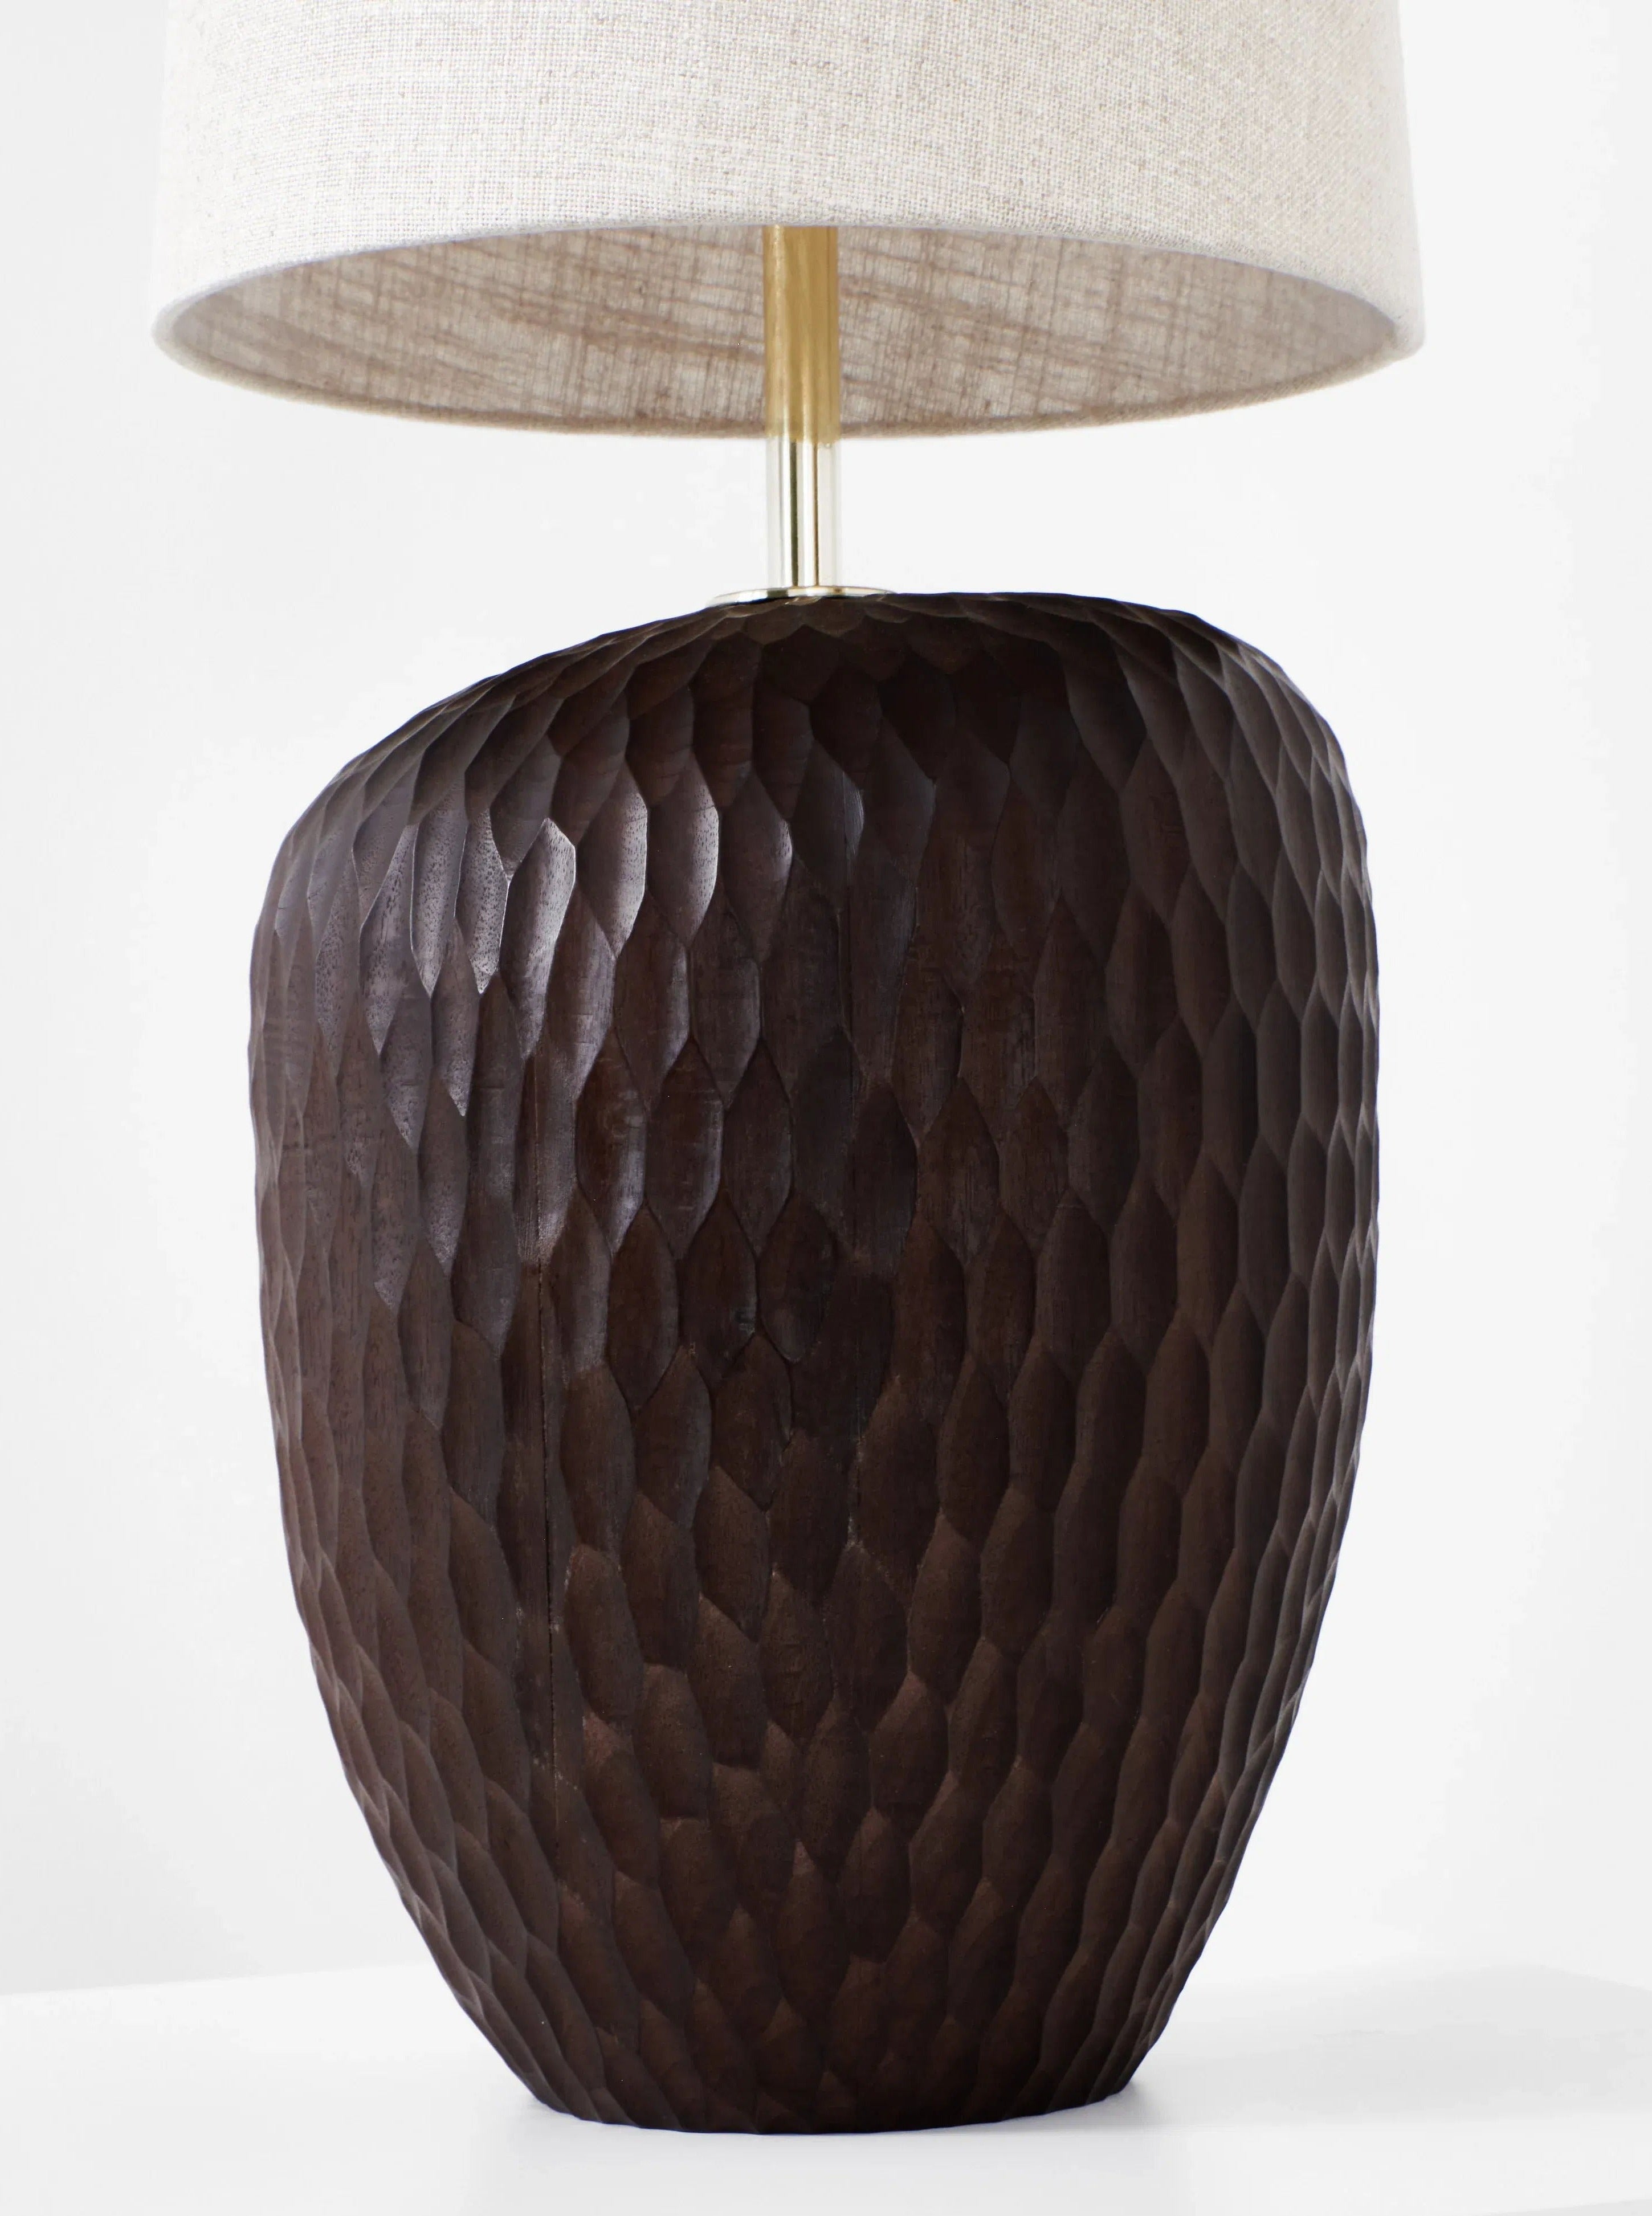 The Large Foz Lamp by Project 213A features a textured, dark brown solid wood base and a beige fabric lampshade. The wooden base has a hexagonal pattern carved into it, adding a rustic aesthetic to the handmade lamp. The cylindrical lampshade has a smooth surface, complementing its artisanal charm.